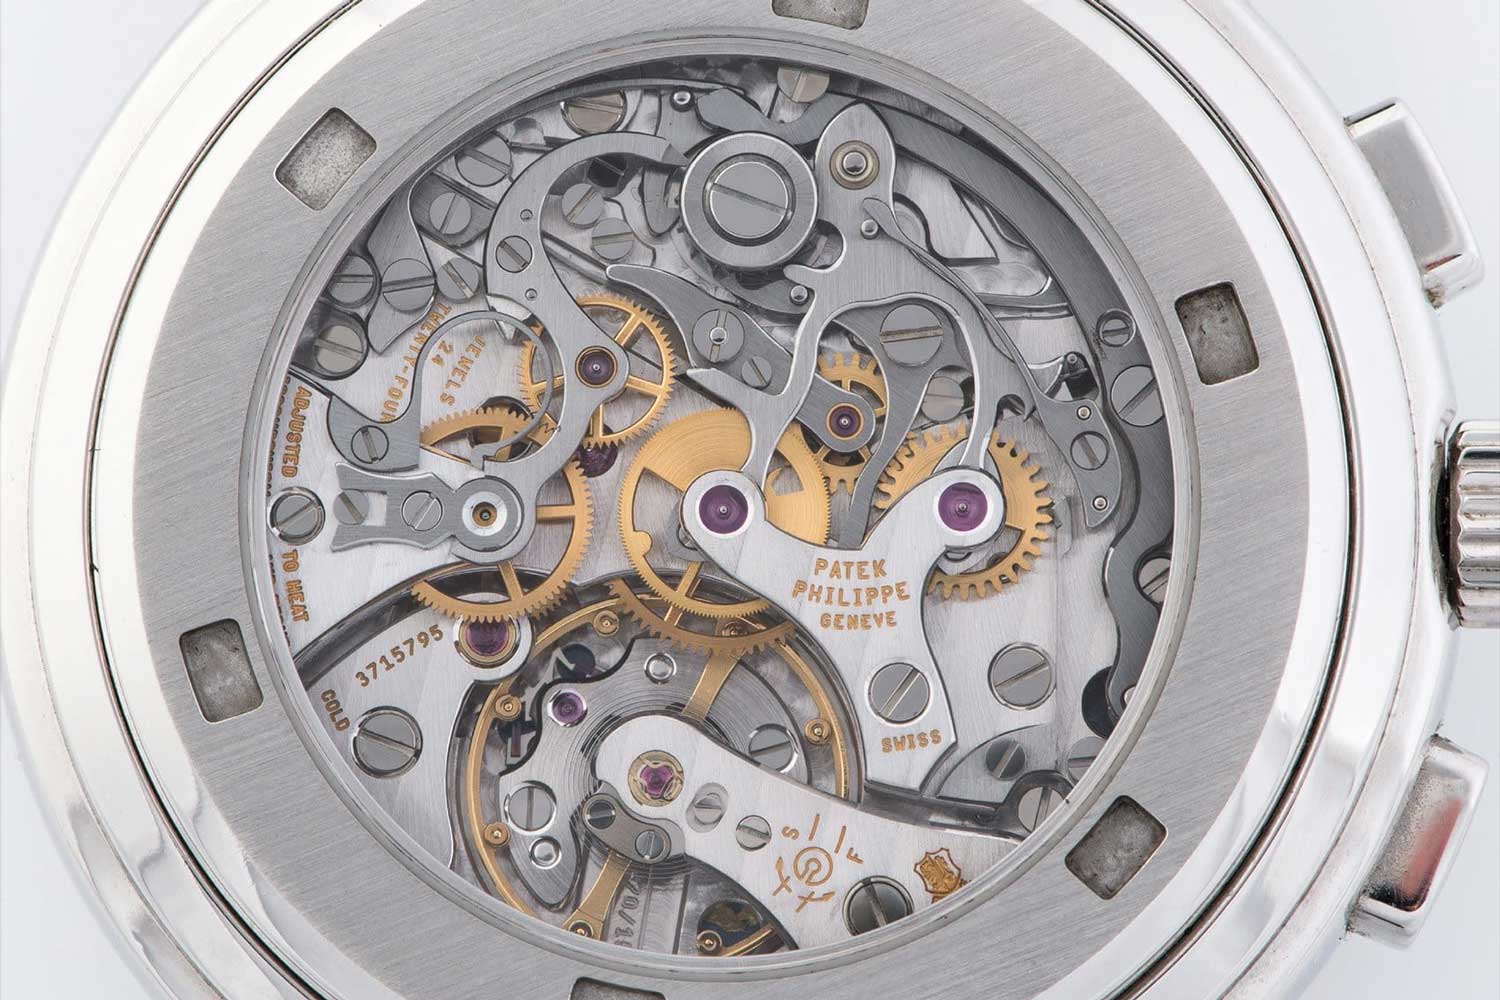 Display caseback of the 5070 showcasing the CH 27-70 within (Image: Phillips.com)